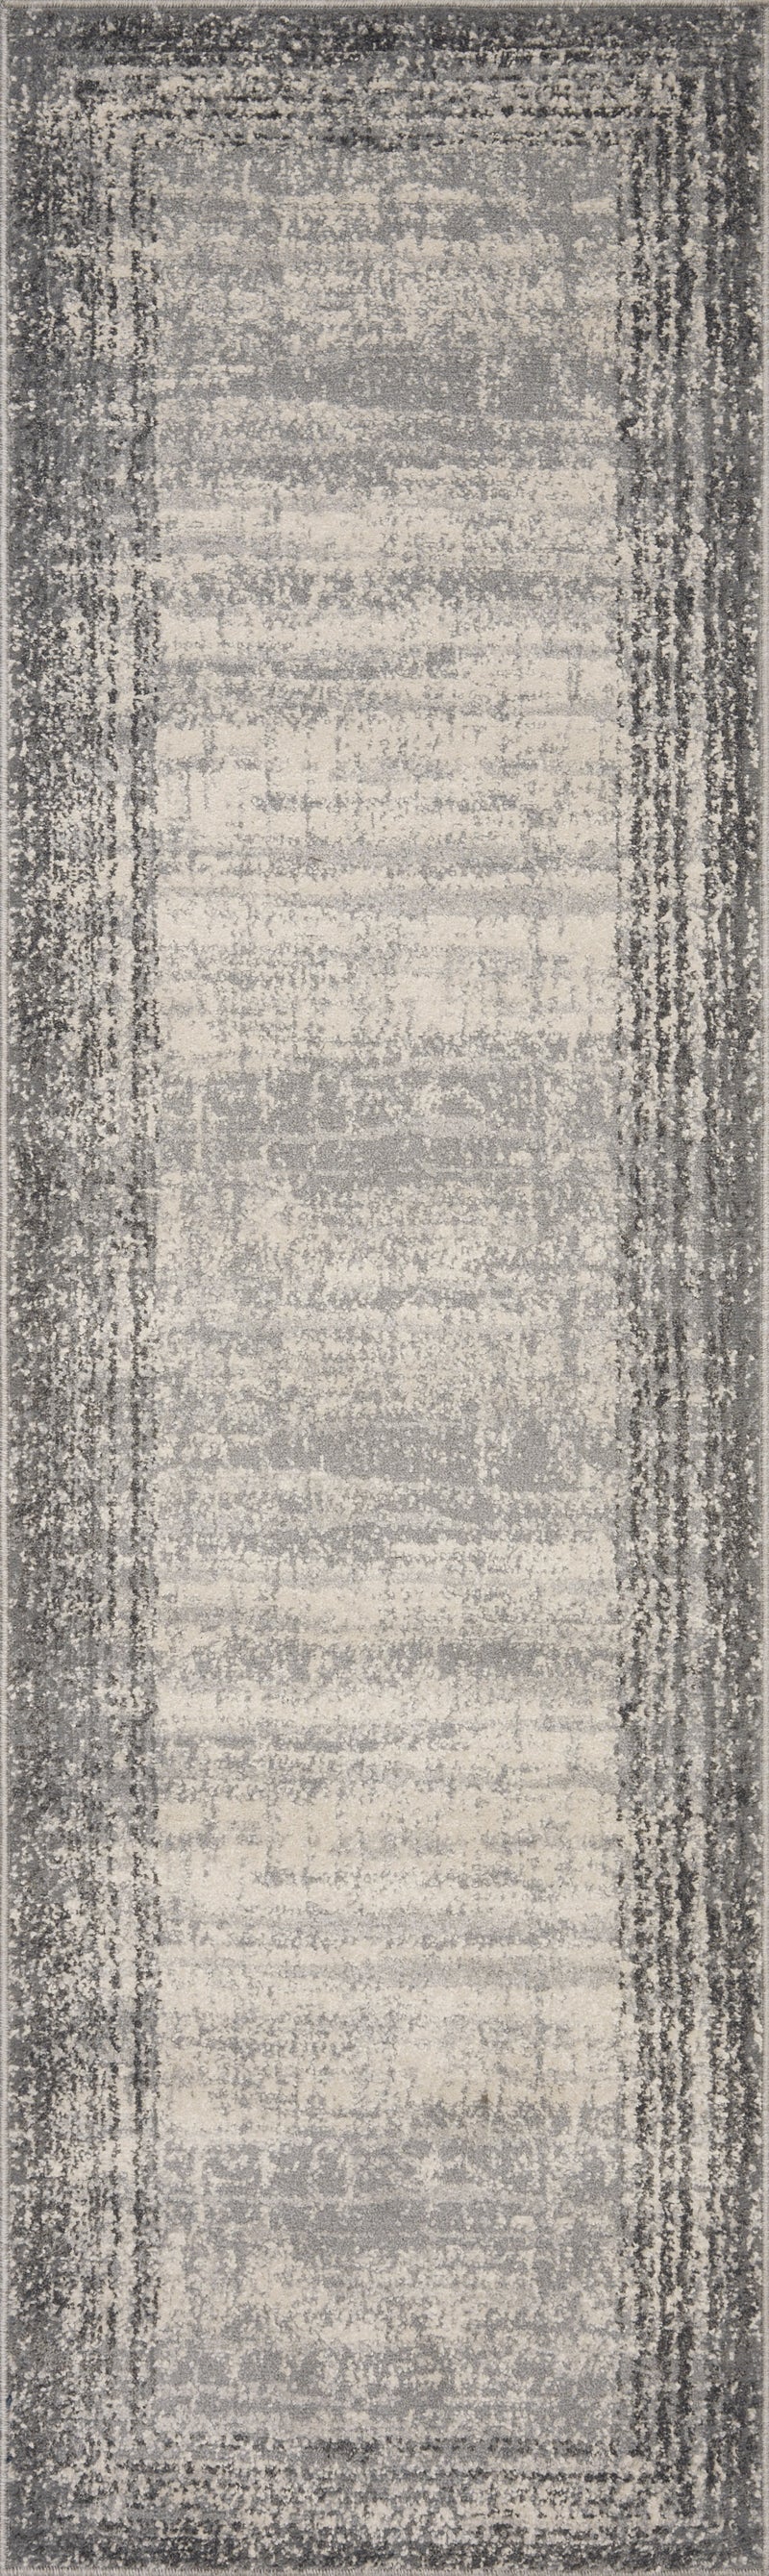 media image for Austen Rug in Pebble / Charcoal by Loloi II 223